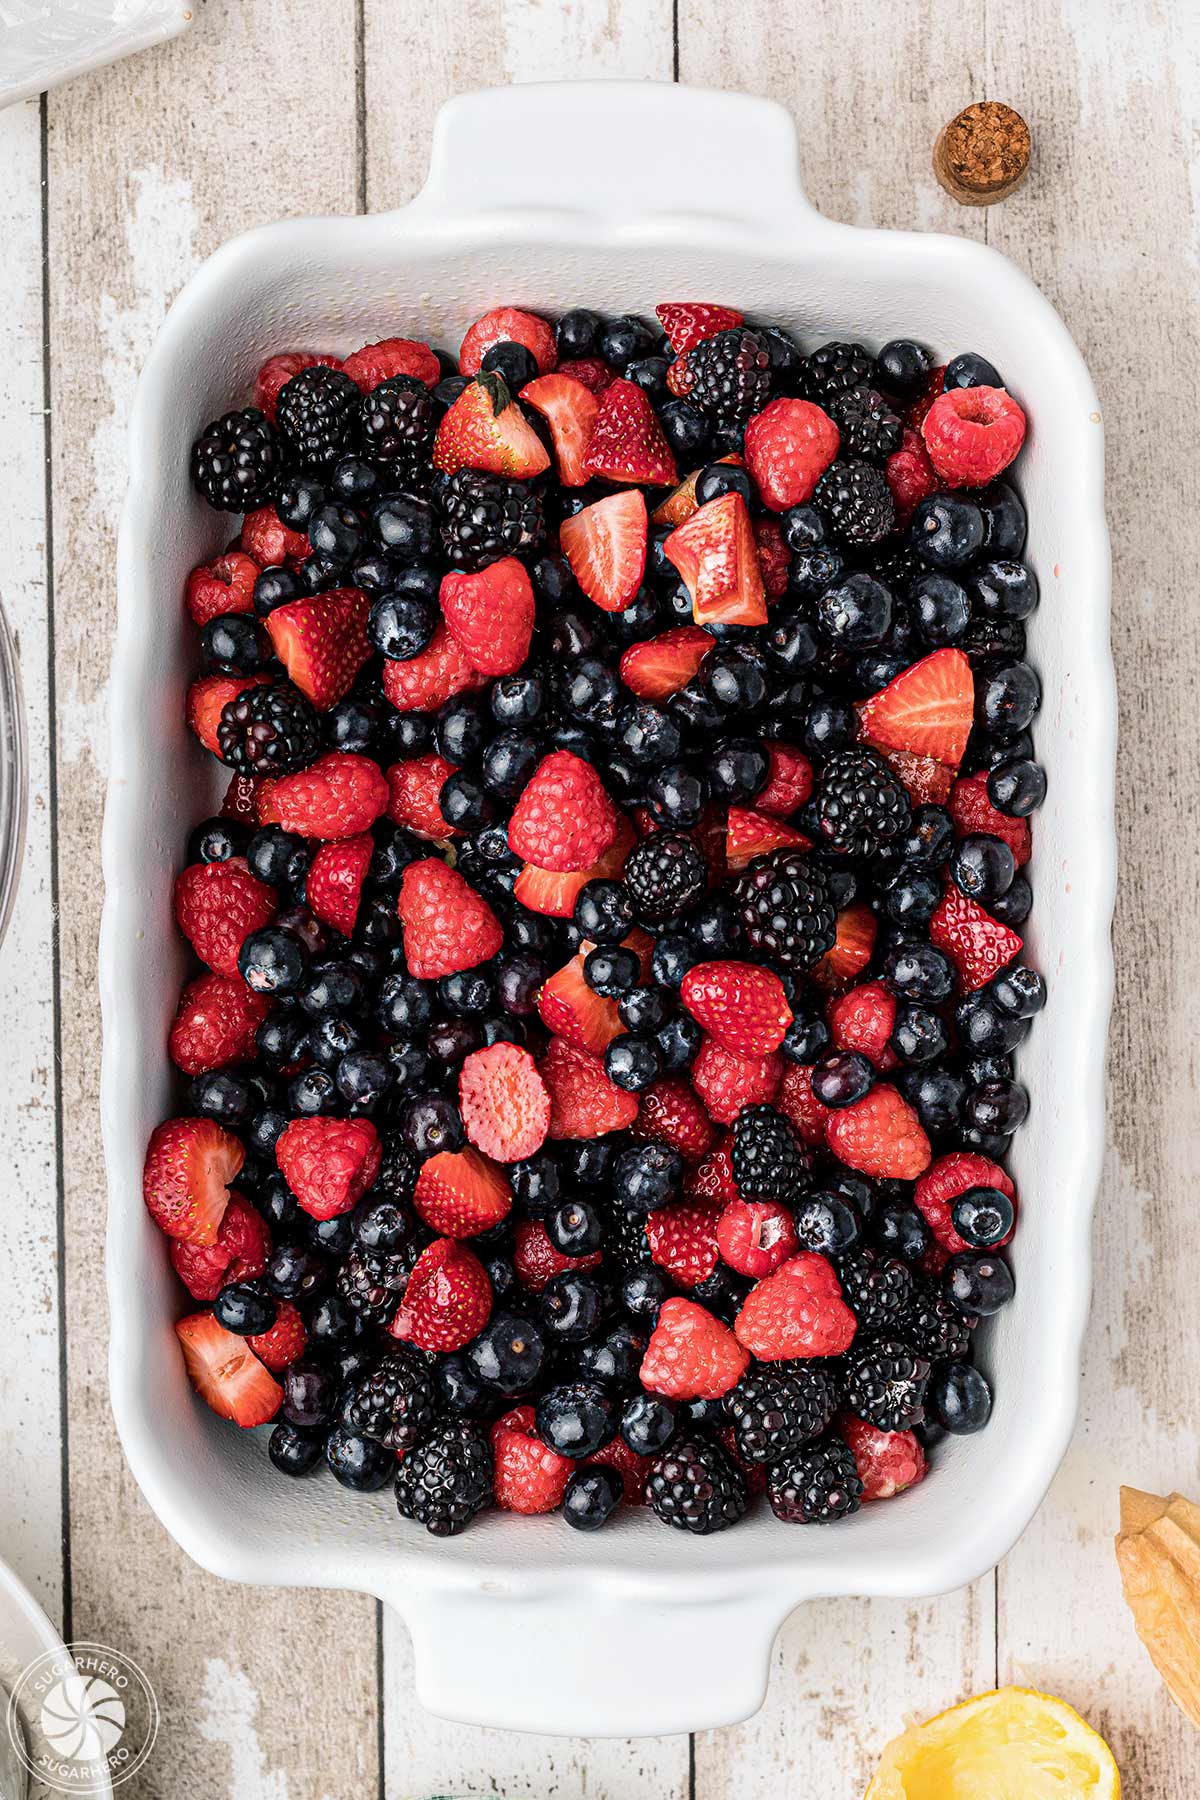 Mixed berries in a baking dish.